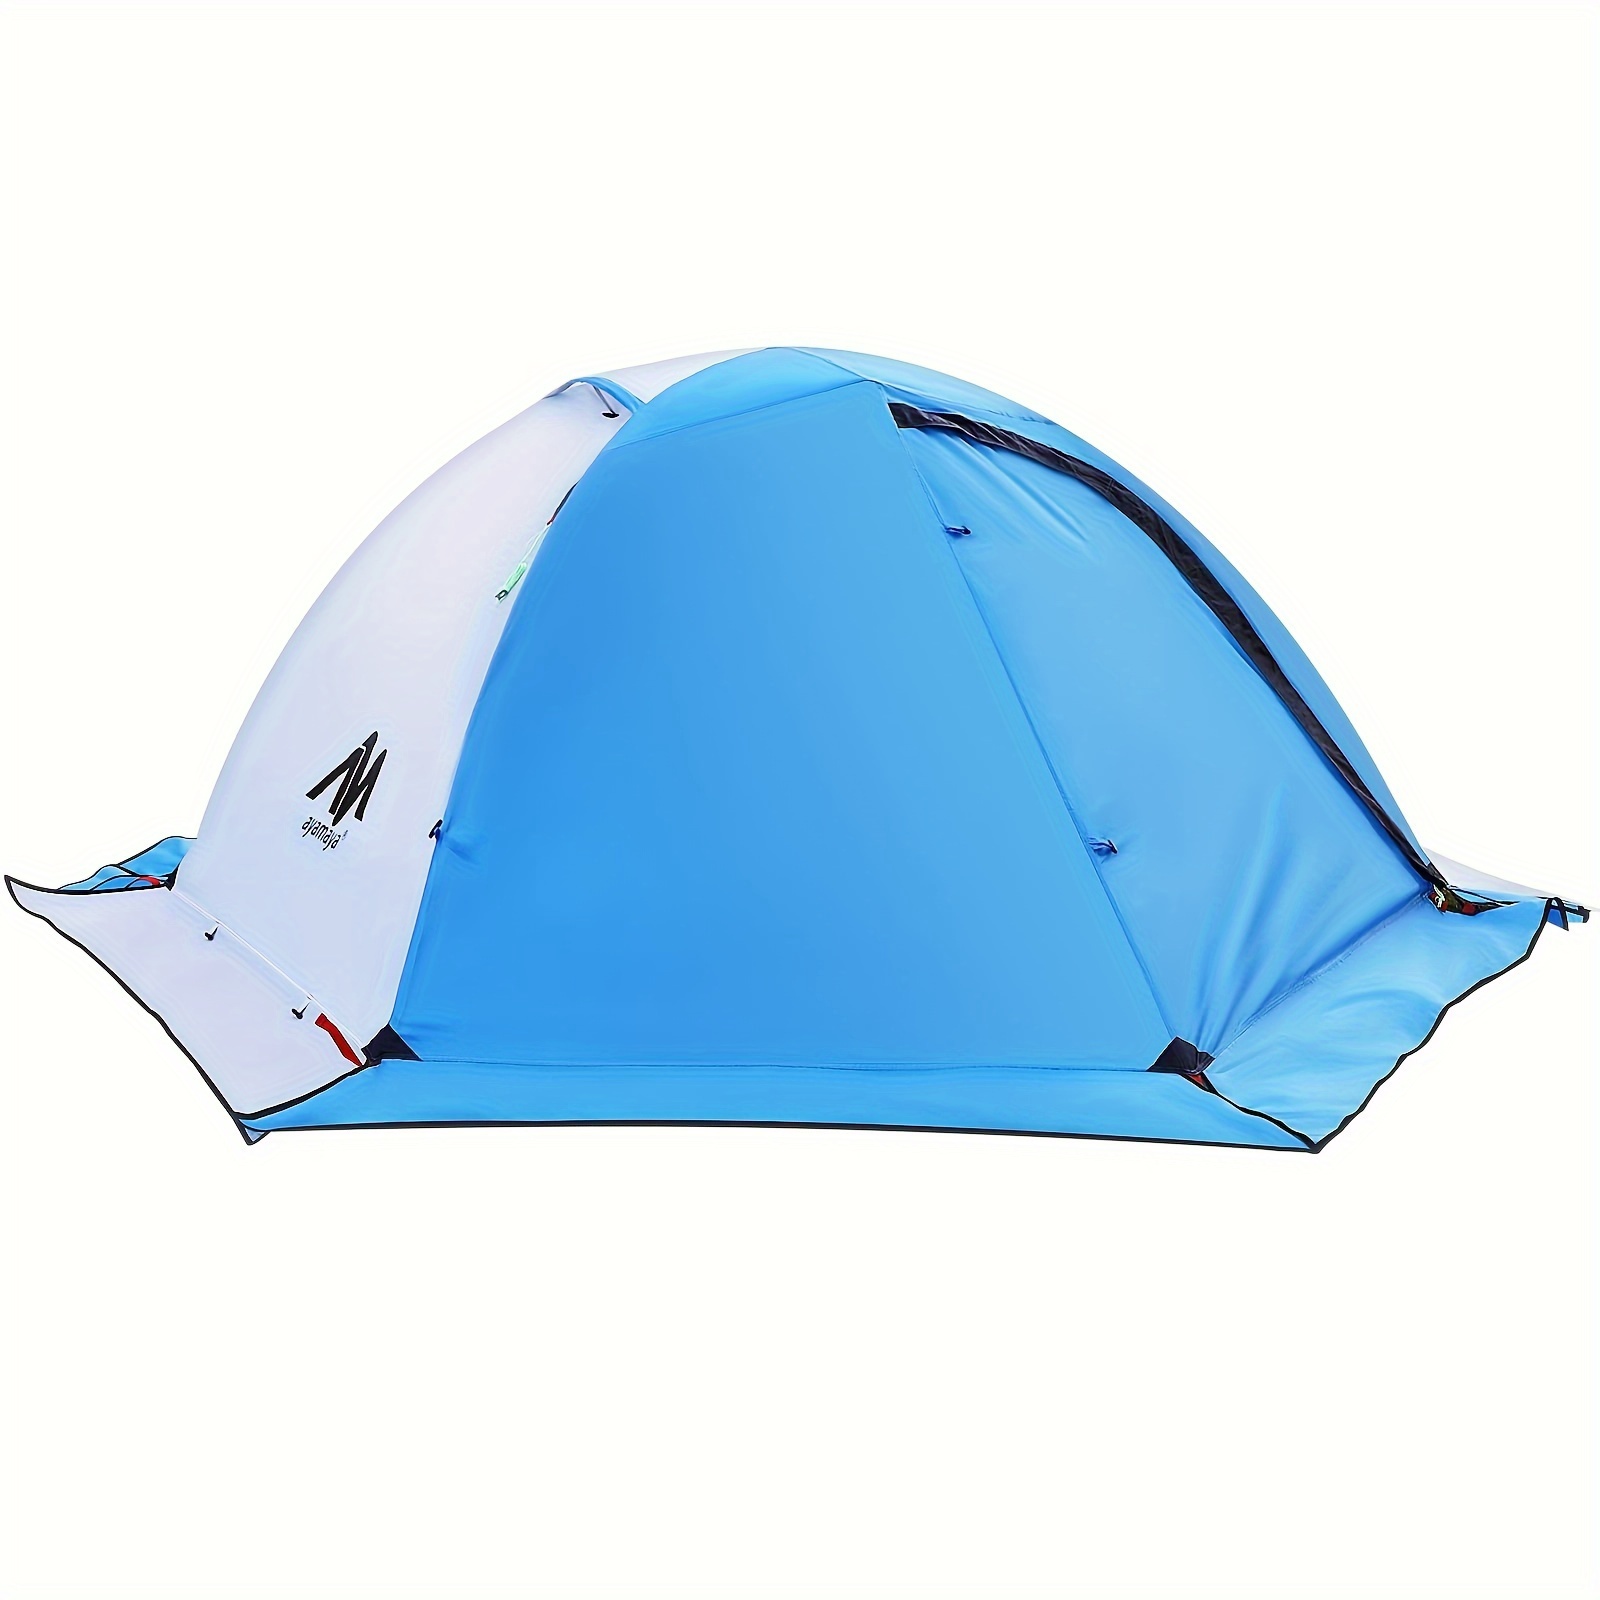 4 Person Lightweight Hot Tent With Stove Jack 5 Pounds About 2 3